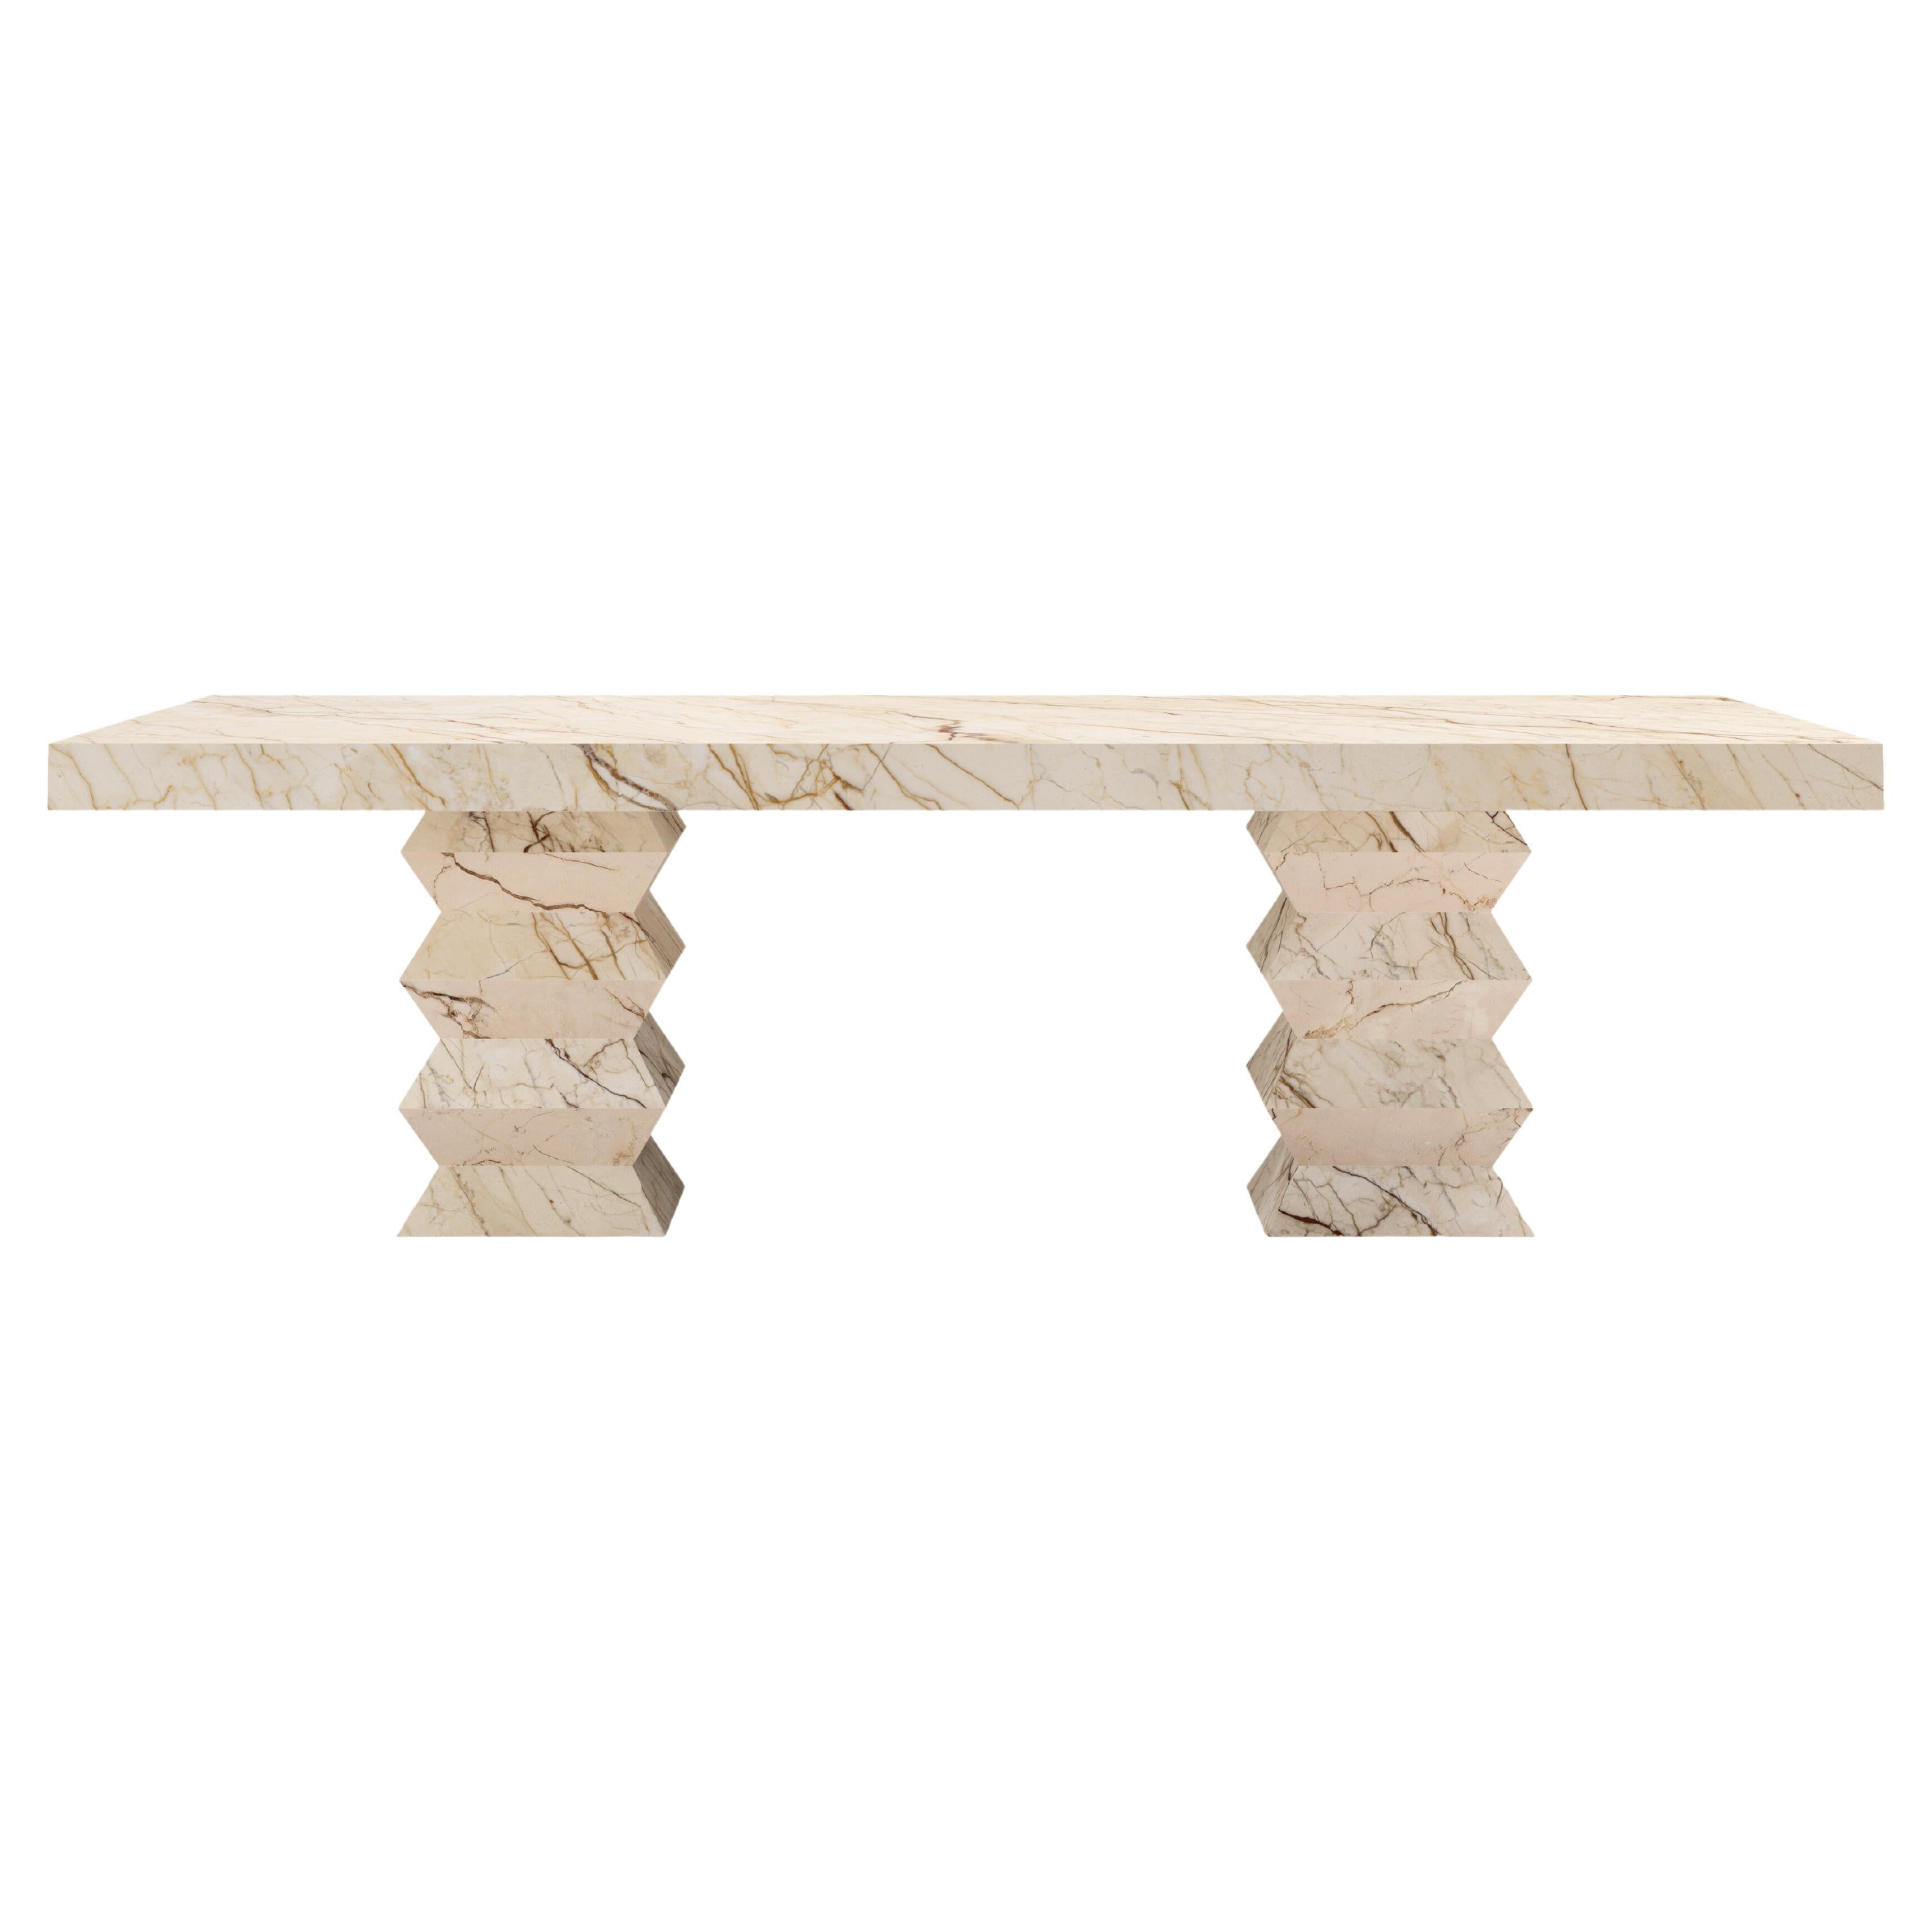 FORM(LA) Grinza Rectangle Dining Table 96"L x 42"W x 32"H Sofita Beige Marble For Sale